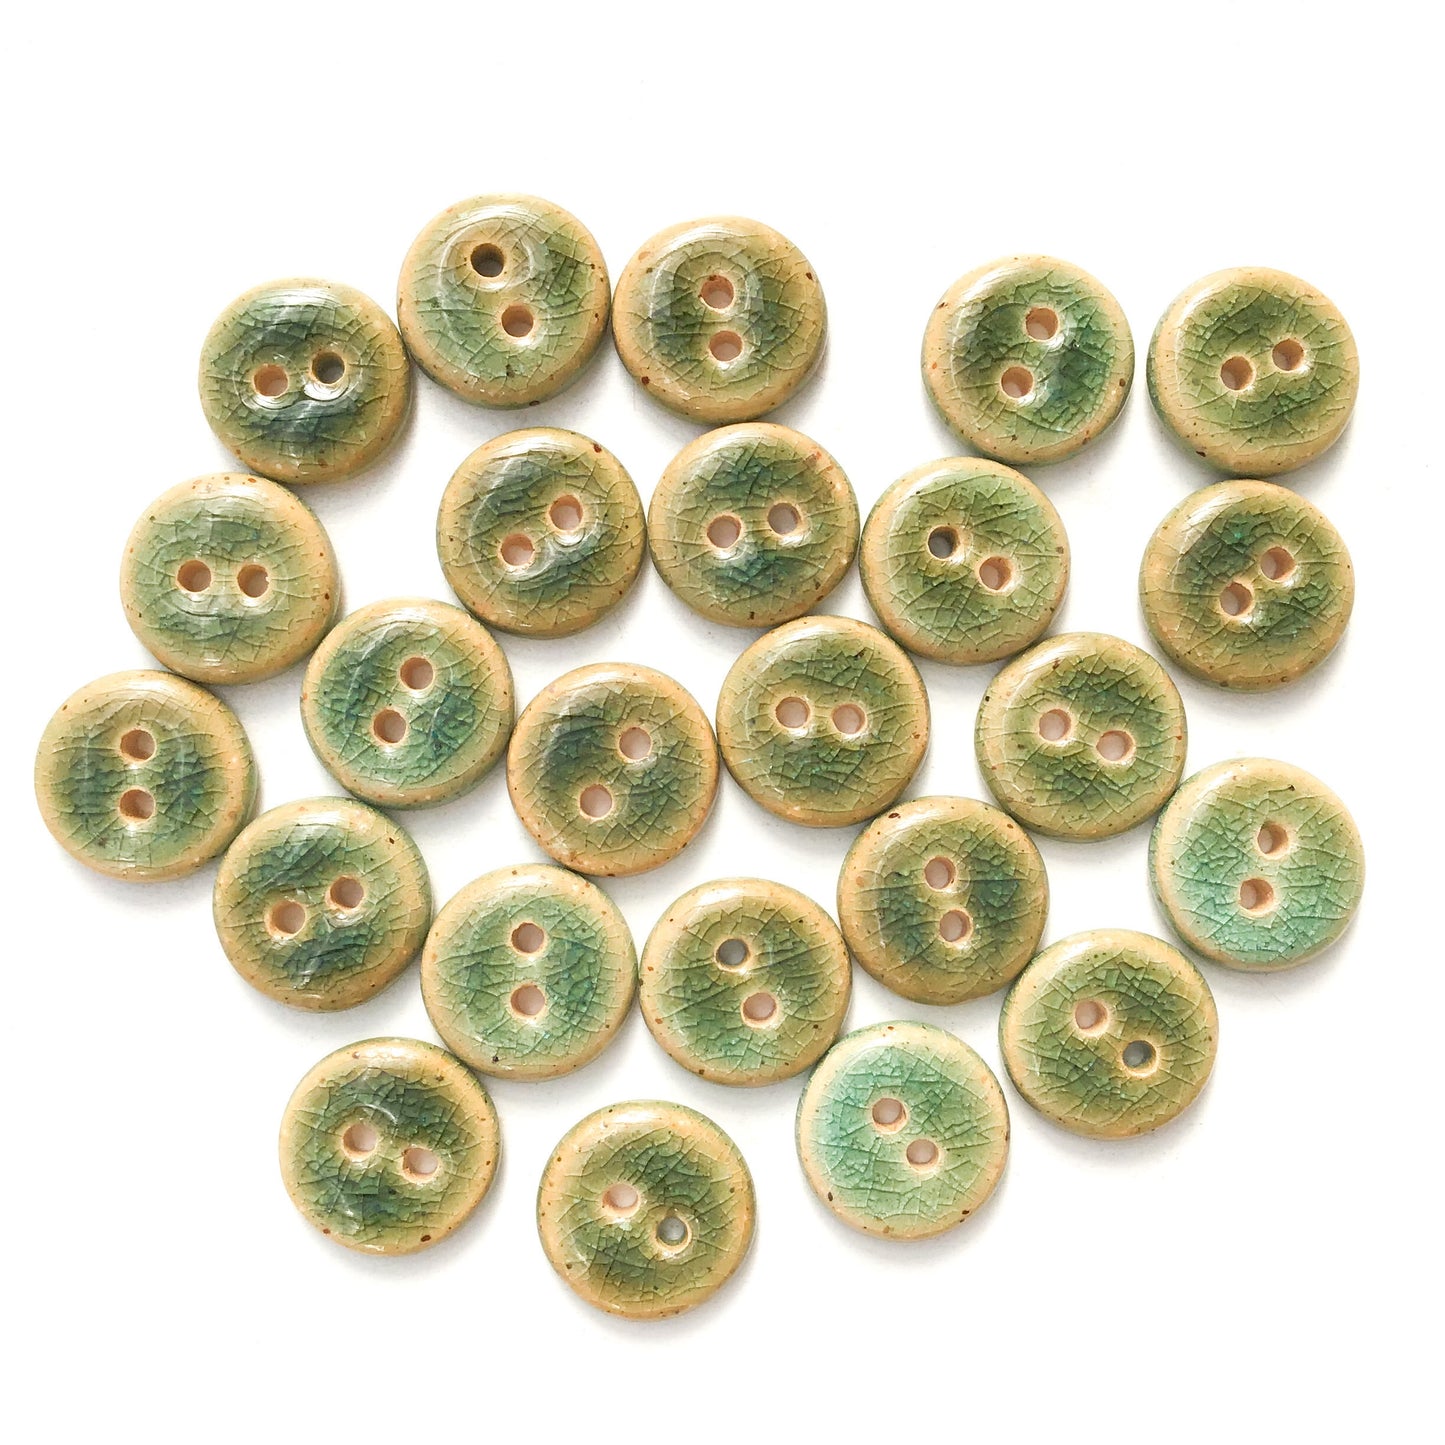 Blue-Green Crackle Ceramic Buttons - Turquoise Clay Buttons - 9/16" (ws-11)